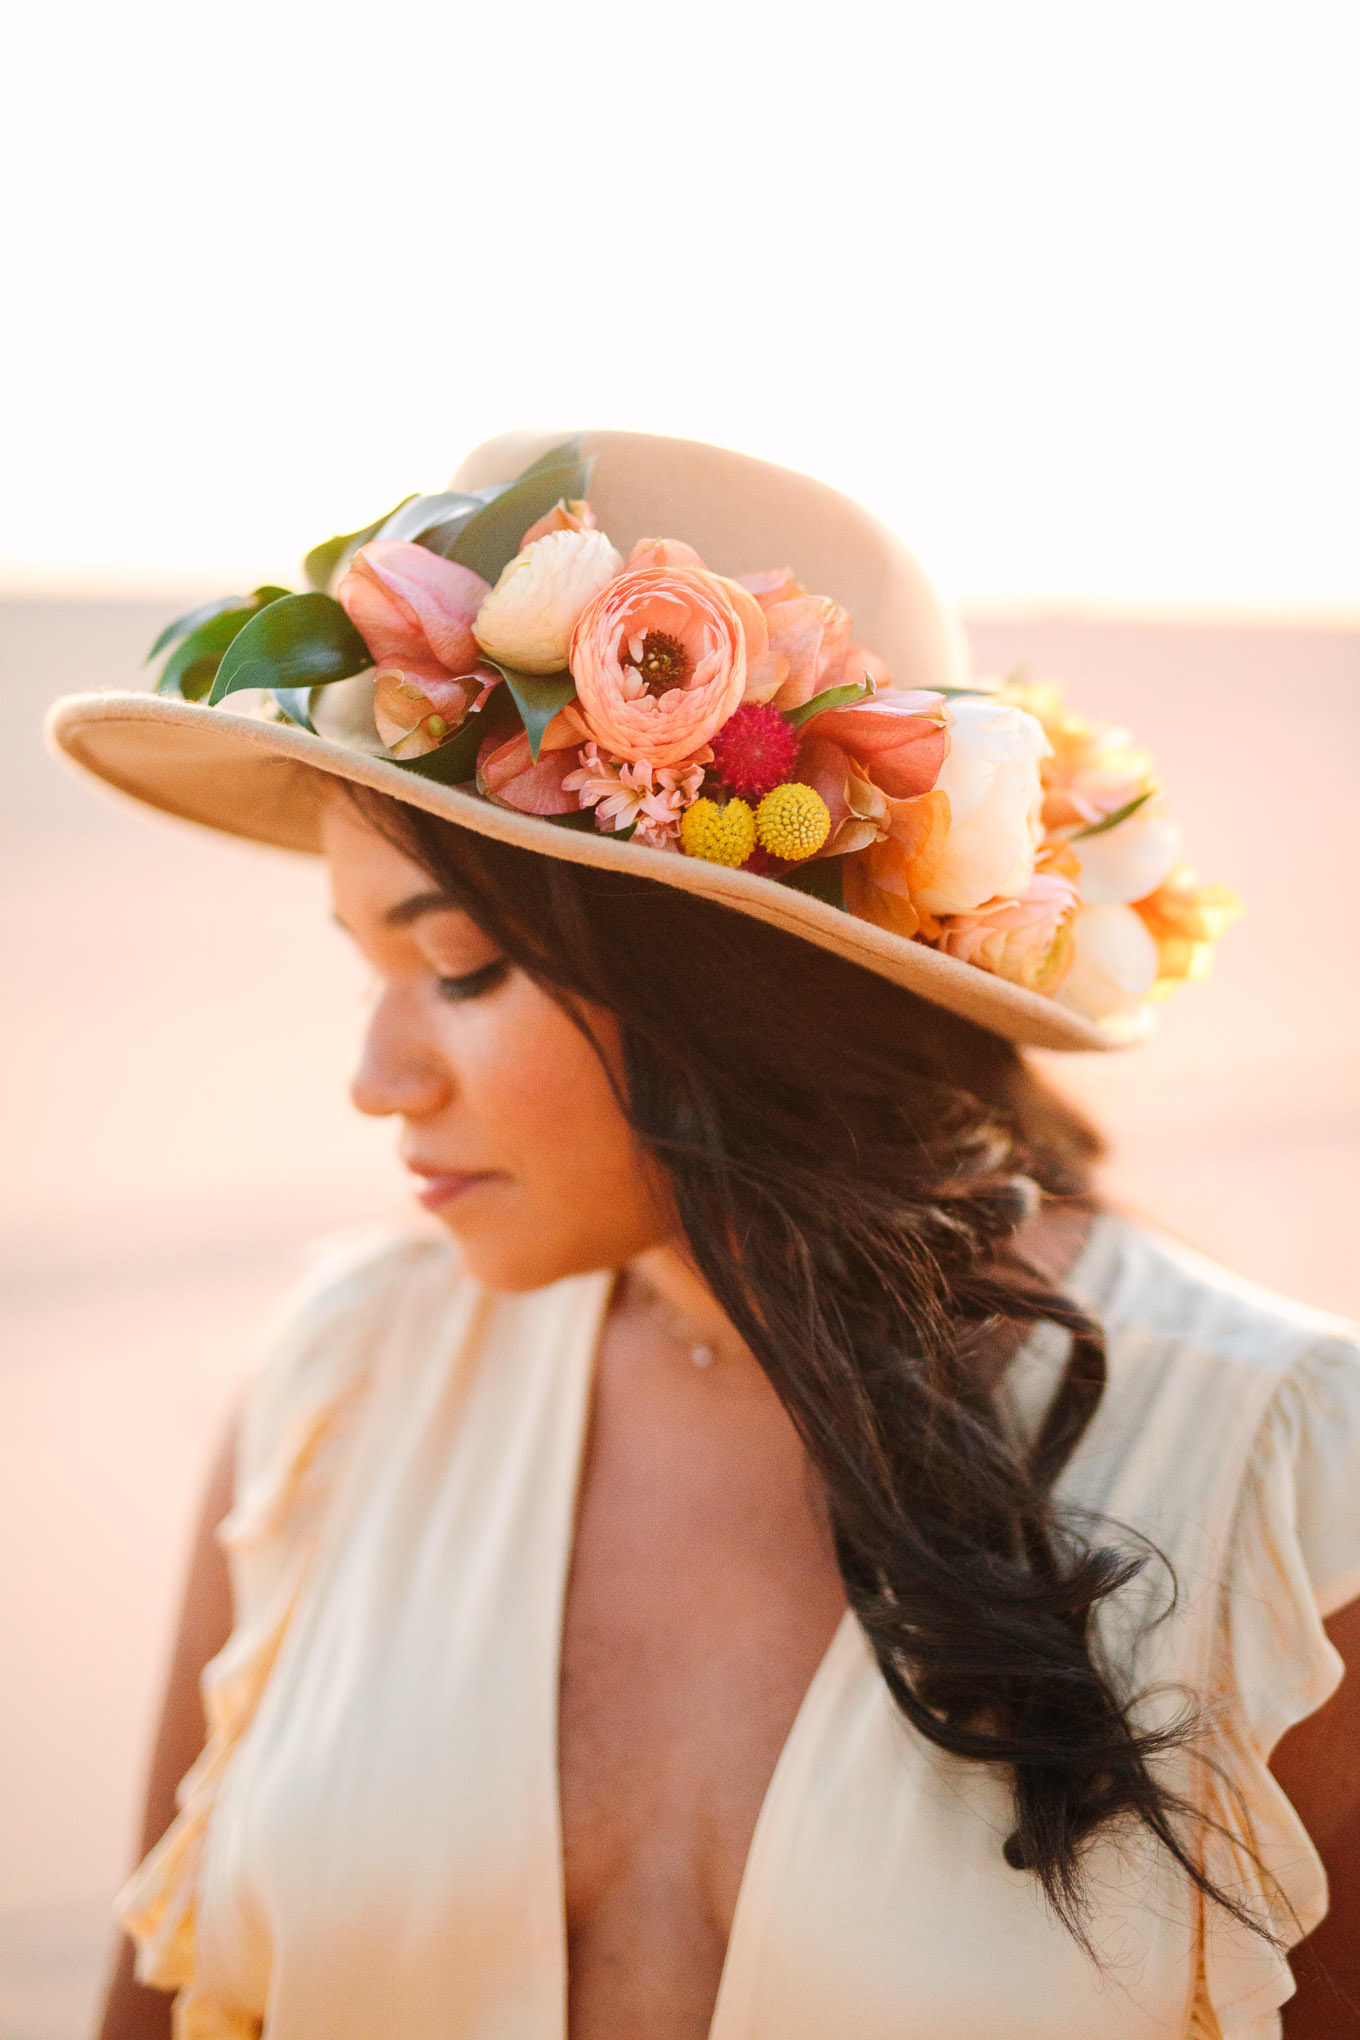 Bride to be in a sun hat with florals | California Sand Dunes engagement session | Colorful Palm Springs wedding photography | #palmspringsphotographer #sanddunes #engagementsession #southerncalifornia  Source: Mary Costa Photography | Los Angeles